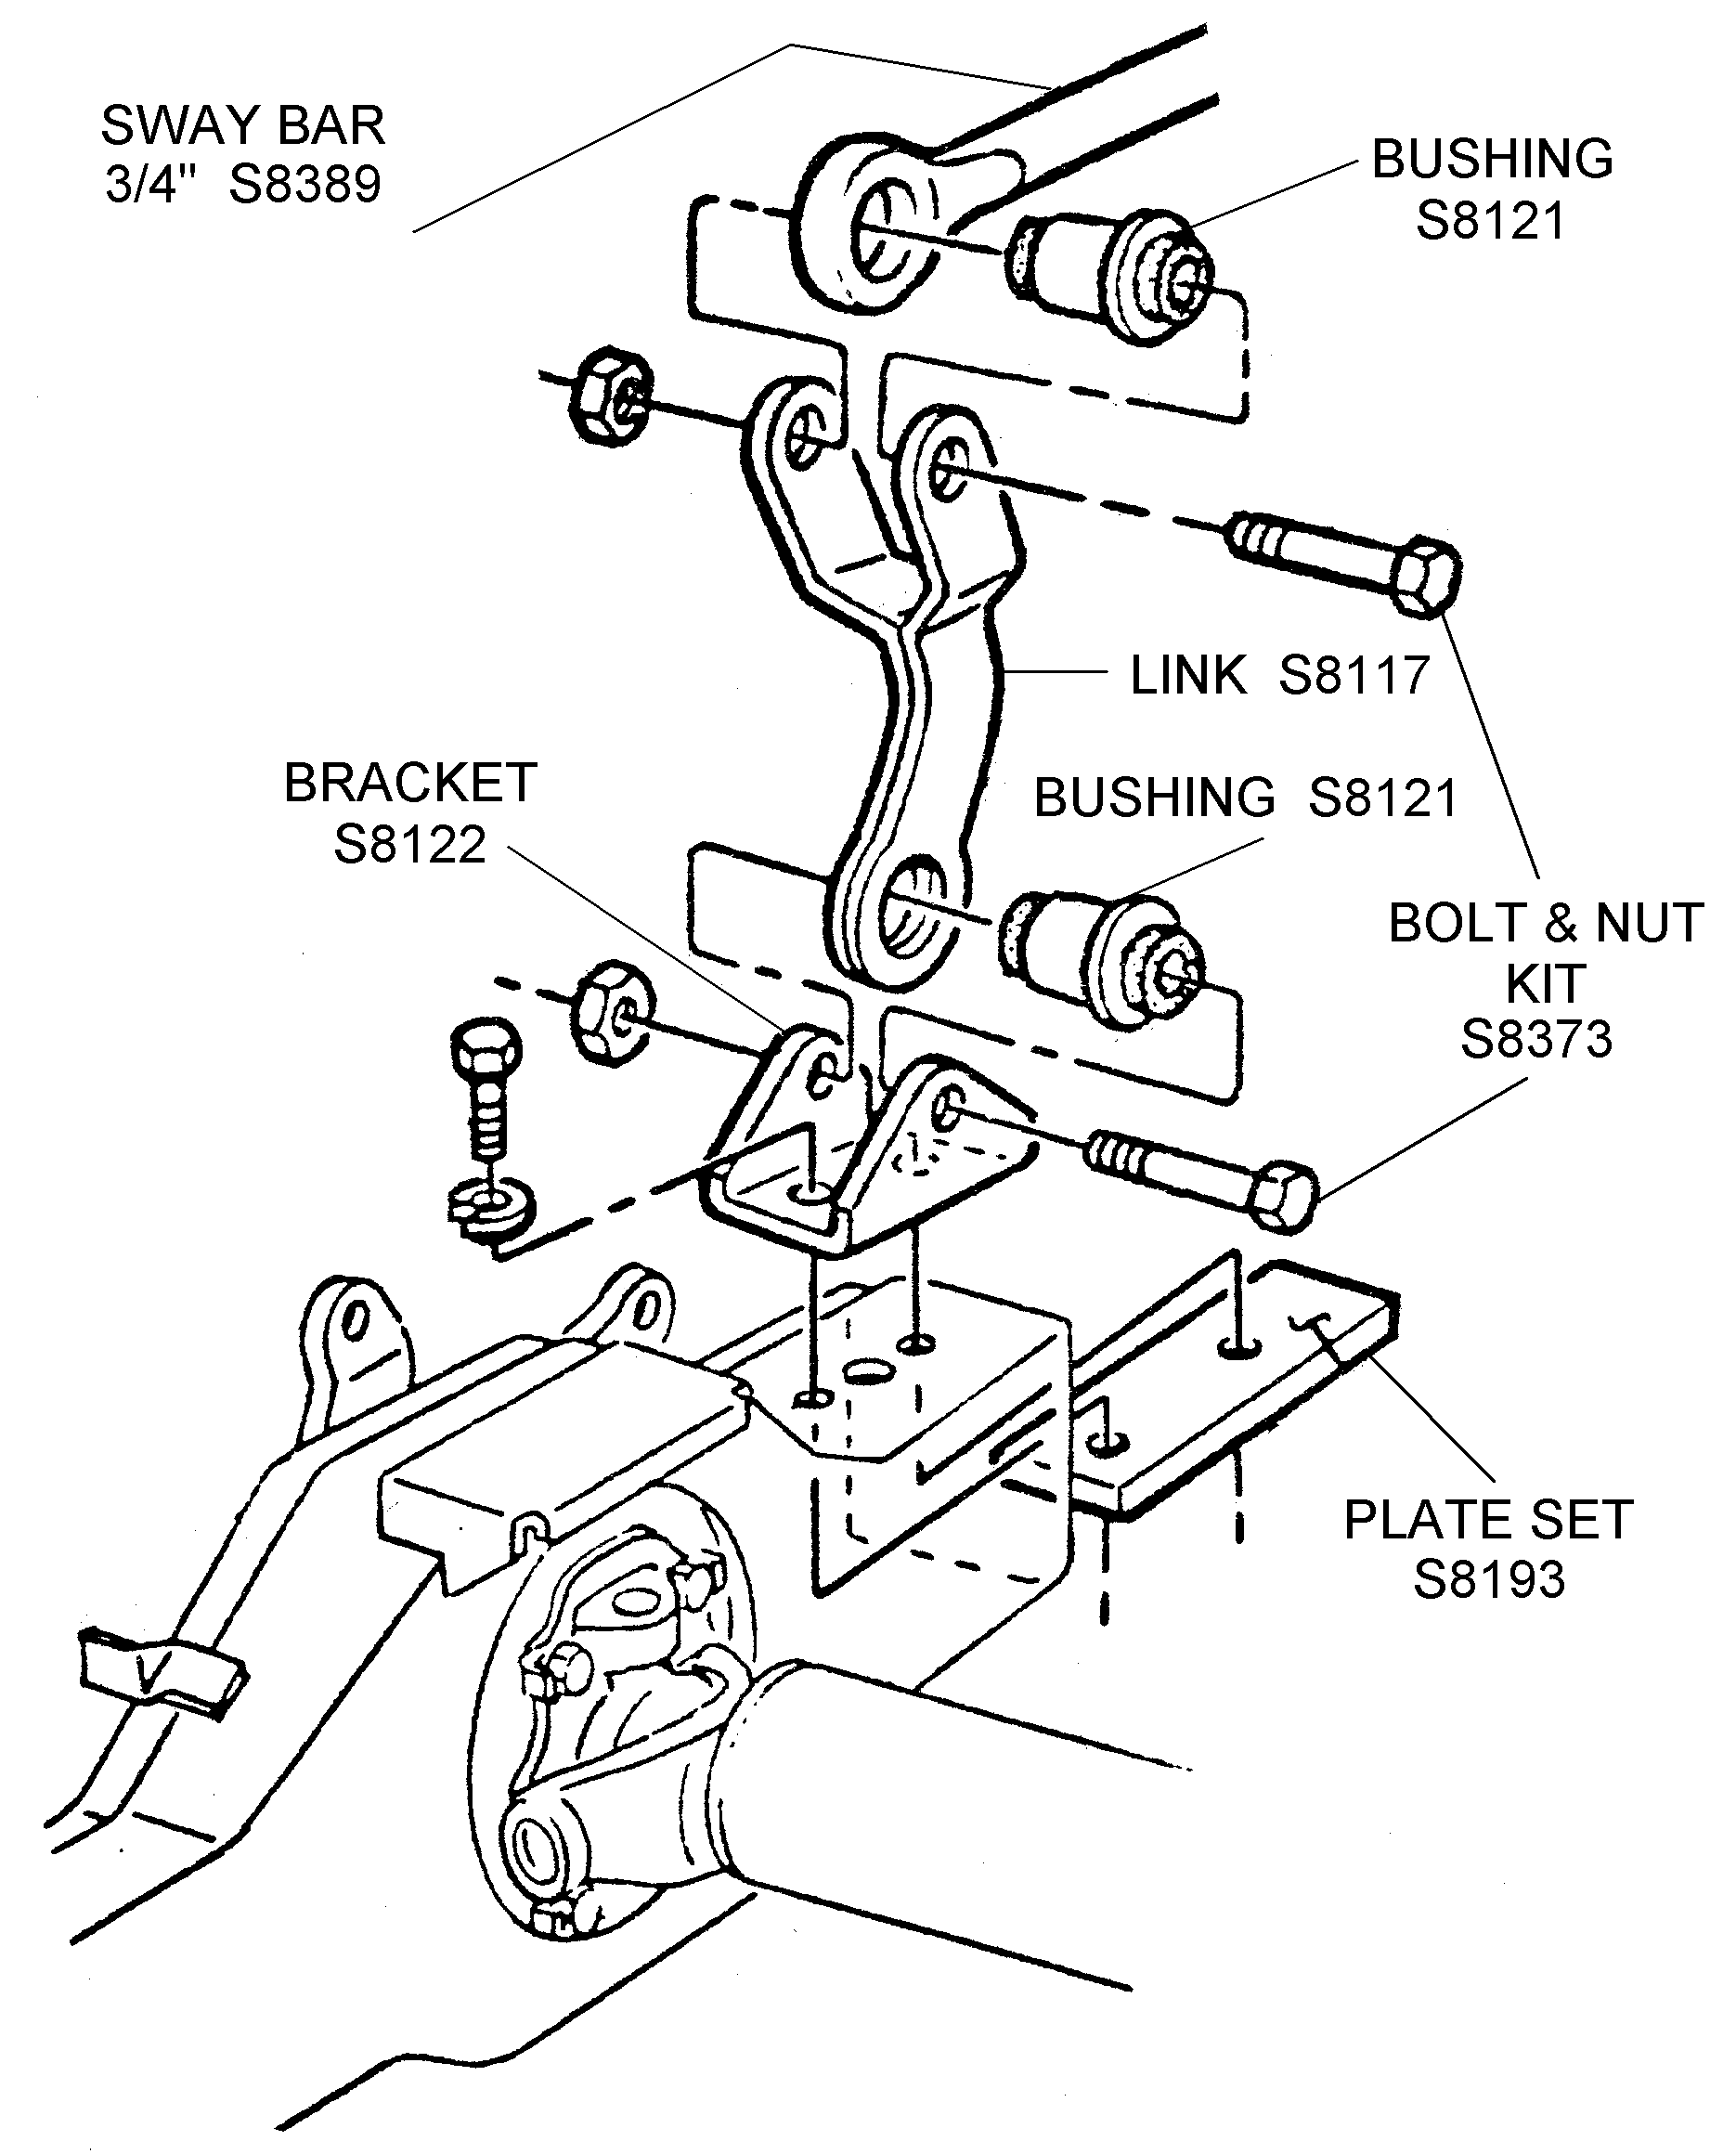 Sway Bar And Related - Diagram View